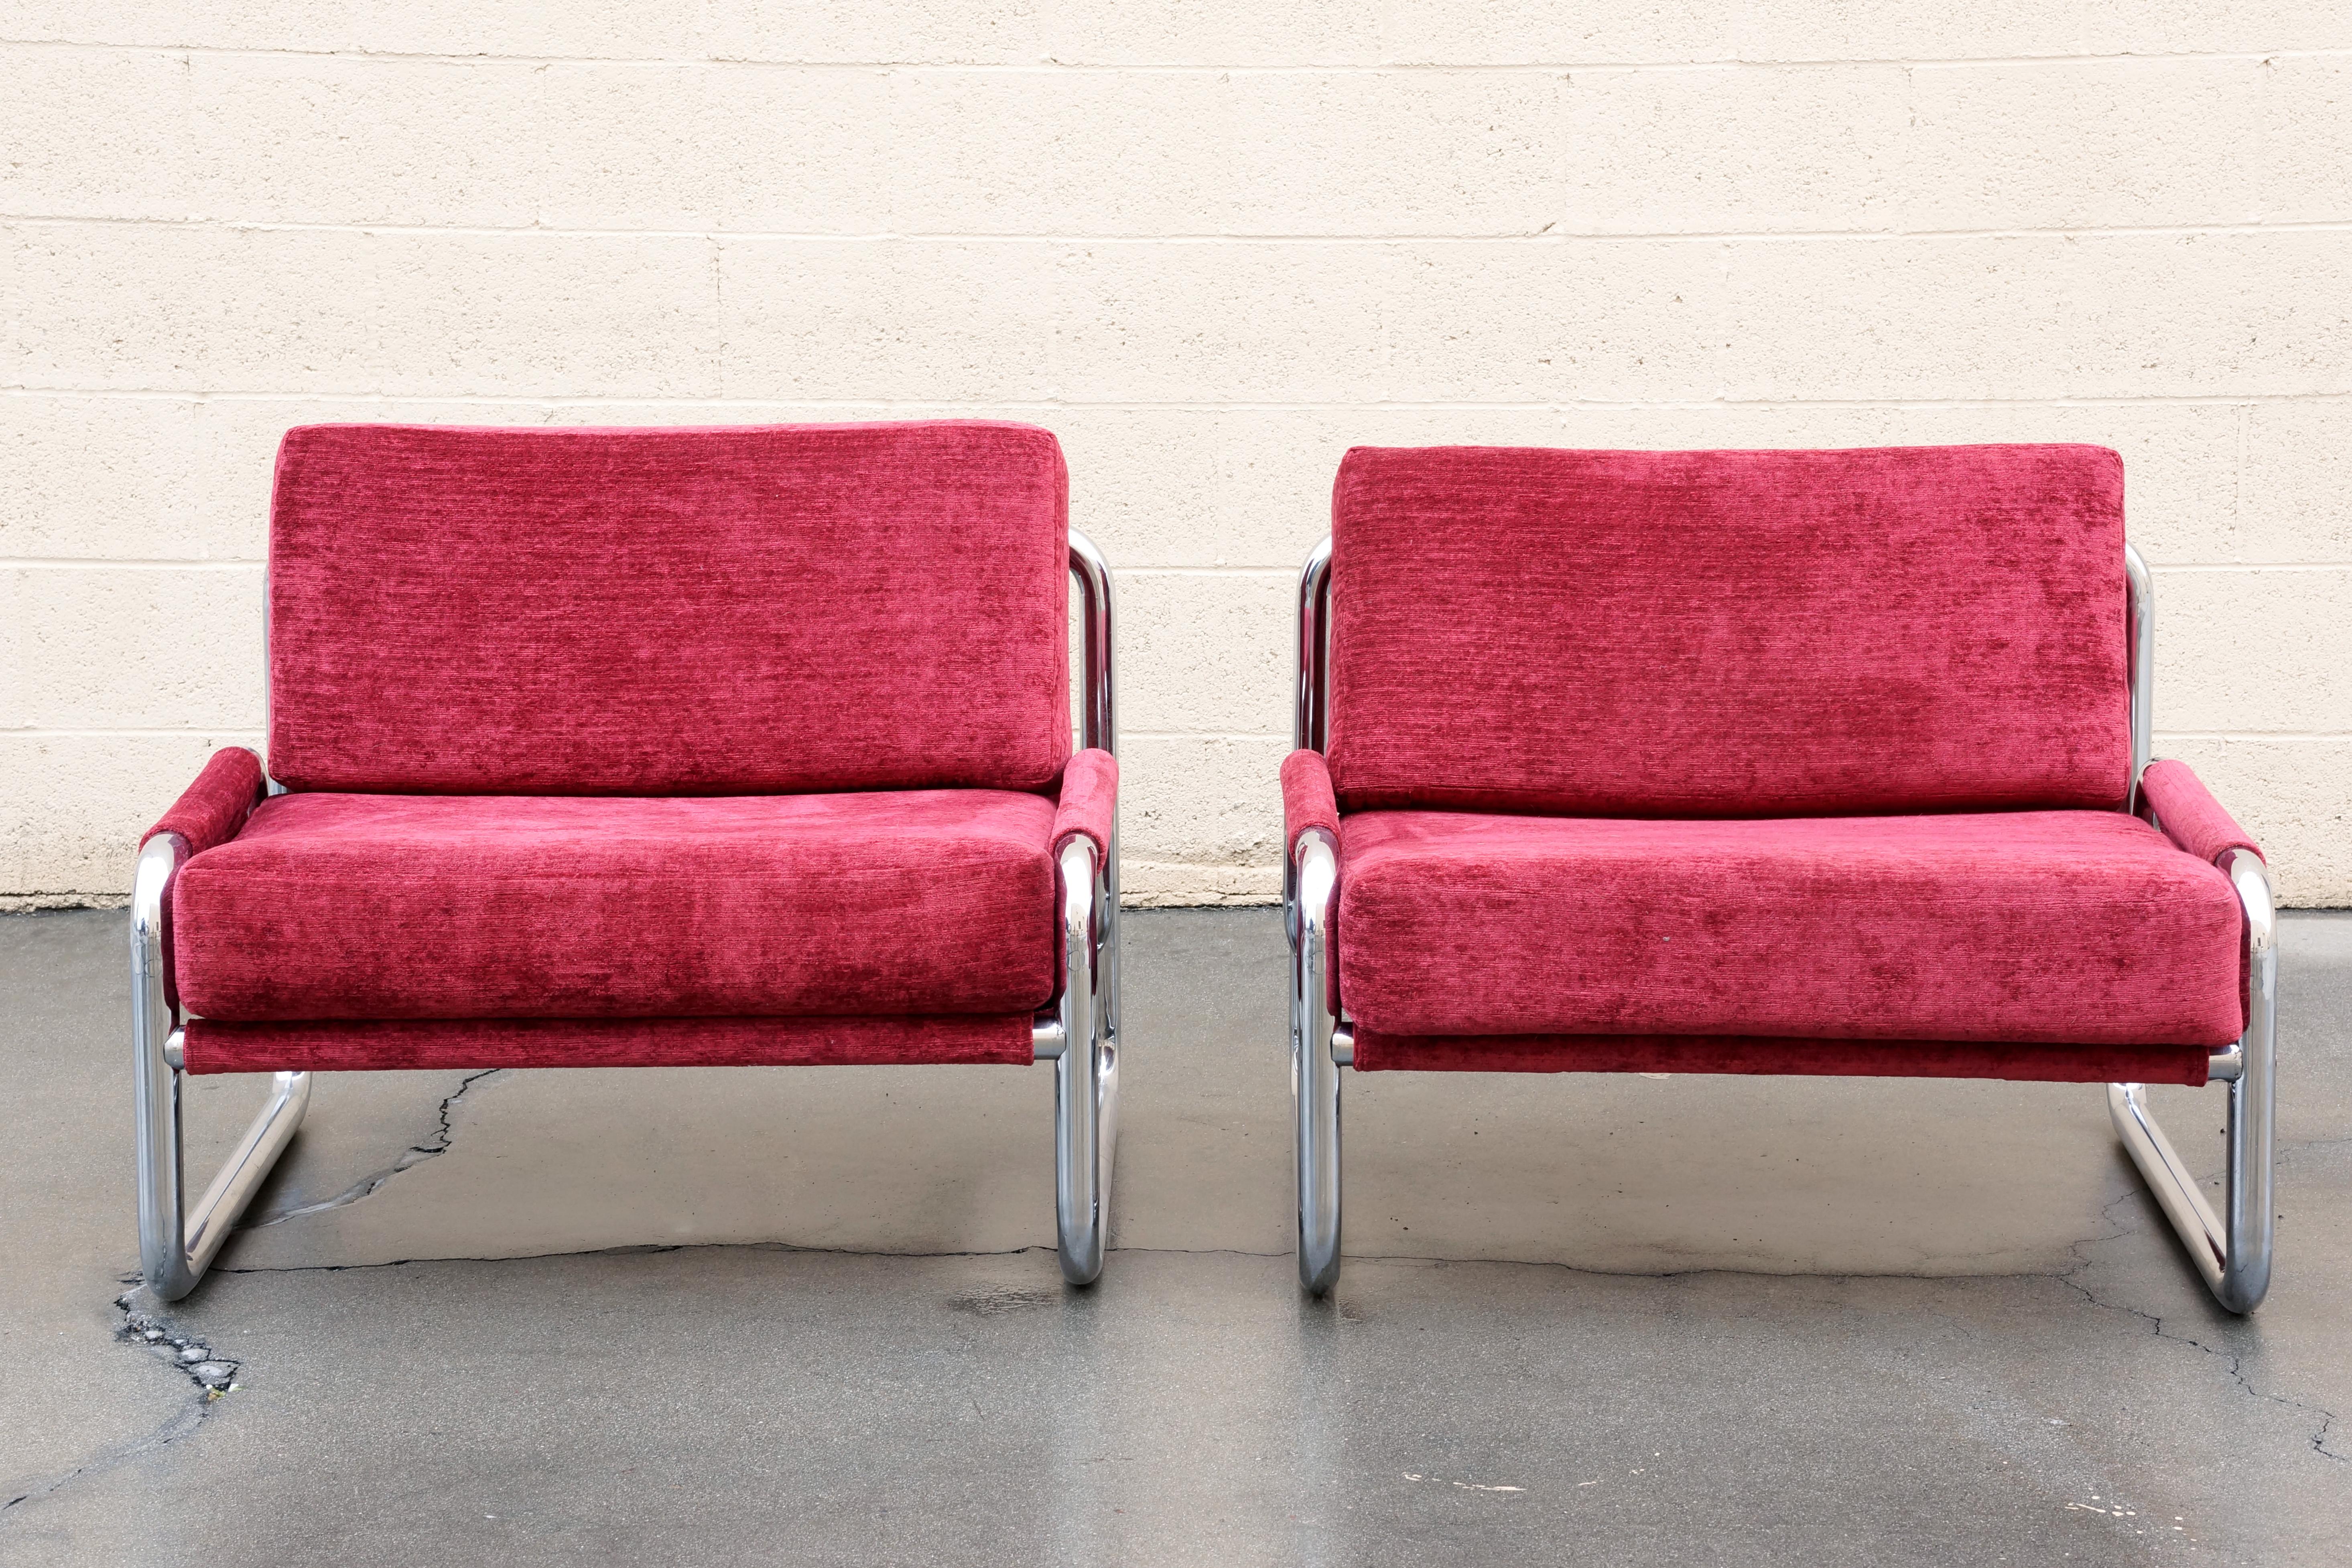 Outstanding pair of tubular chrome sling chairs in the style of Jerry Johnson, early 1970s. Features 3